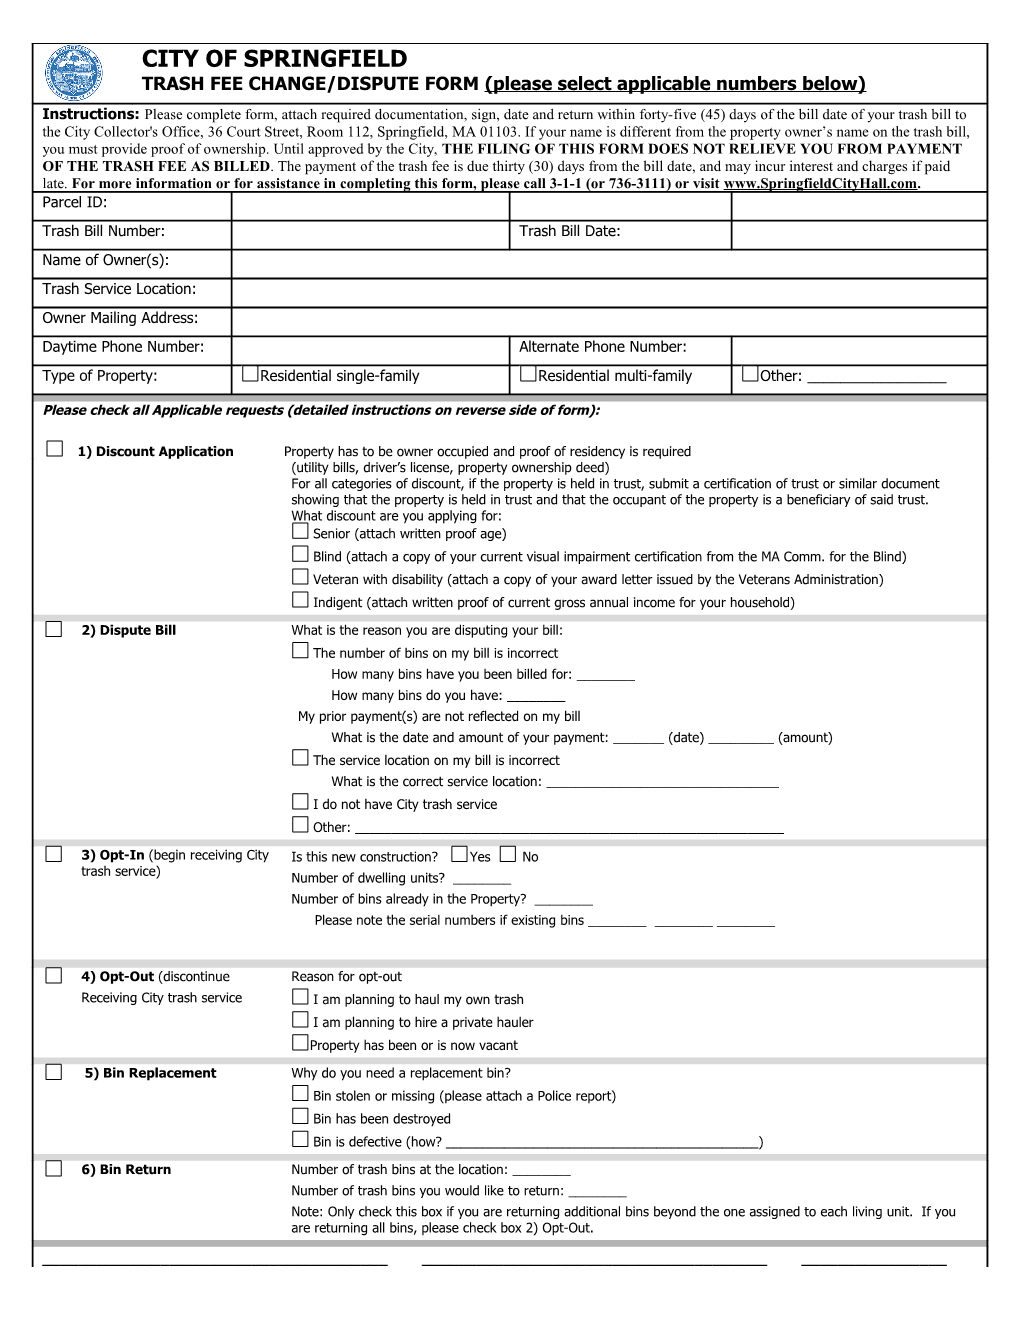 CITY of SPRINGFIELD TRASH FEE CHANGE/DISPUTE FORM (Please Select Applicable Numbers Below)